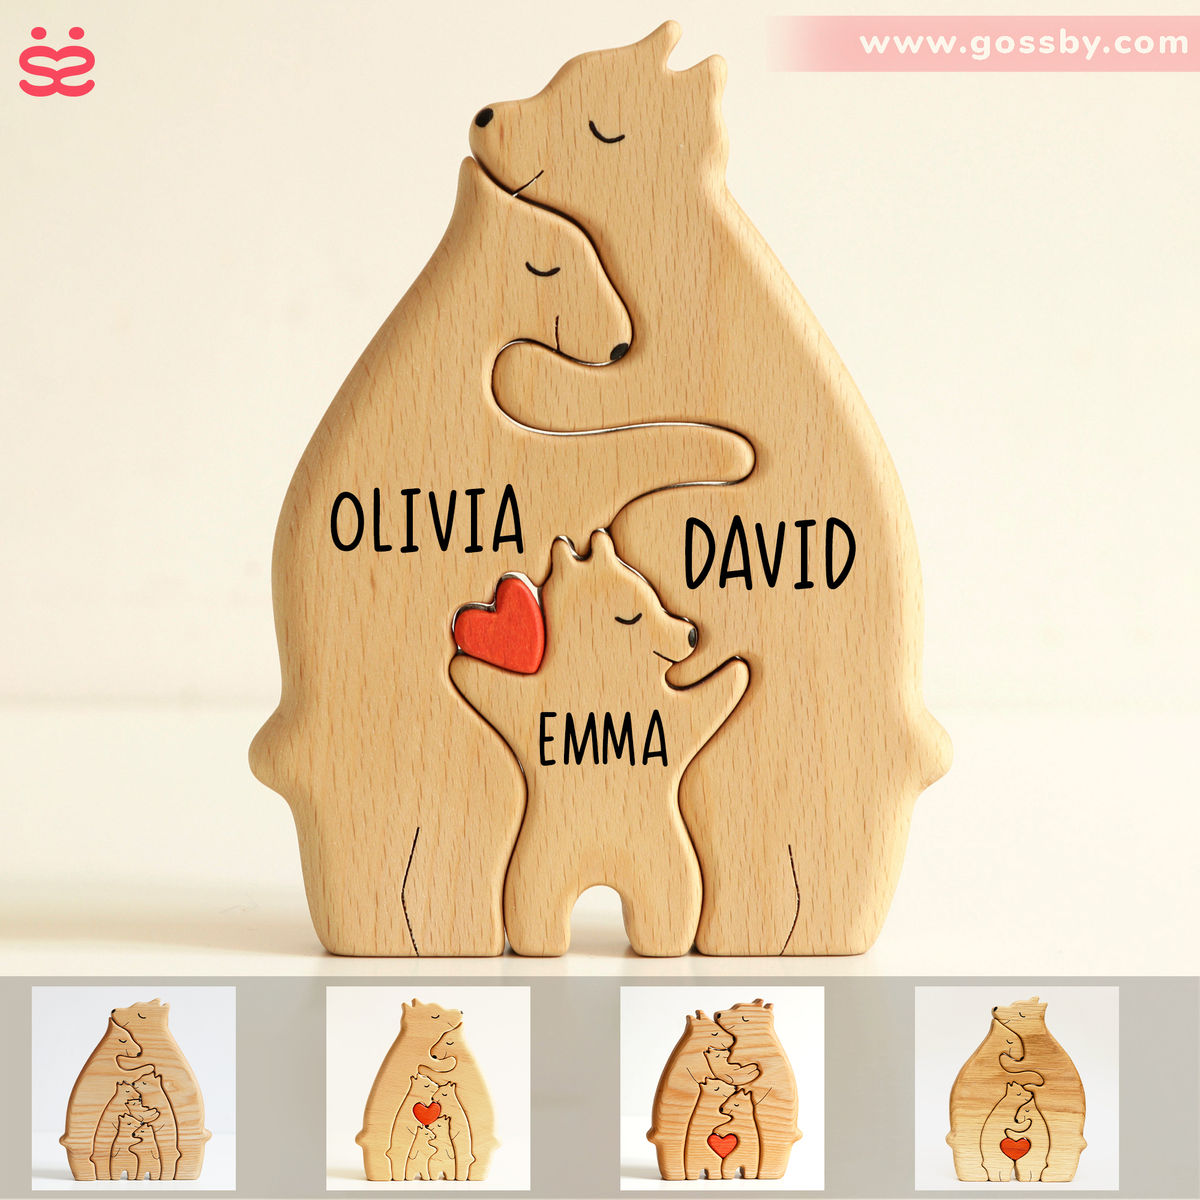 Wooden Bears family puzzle - Up to 6 Kids - Christmas Decor, Family Keepsake Gift, Home Decor